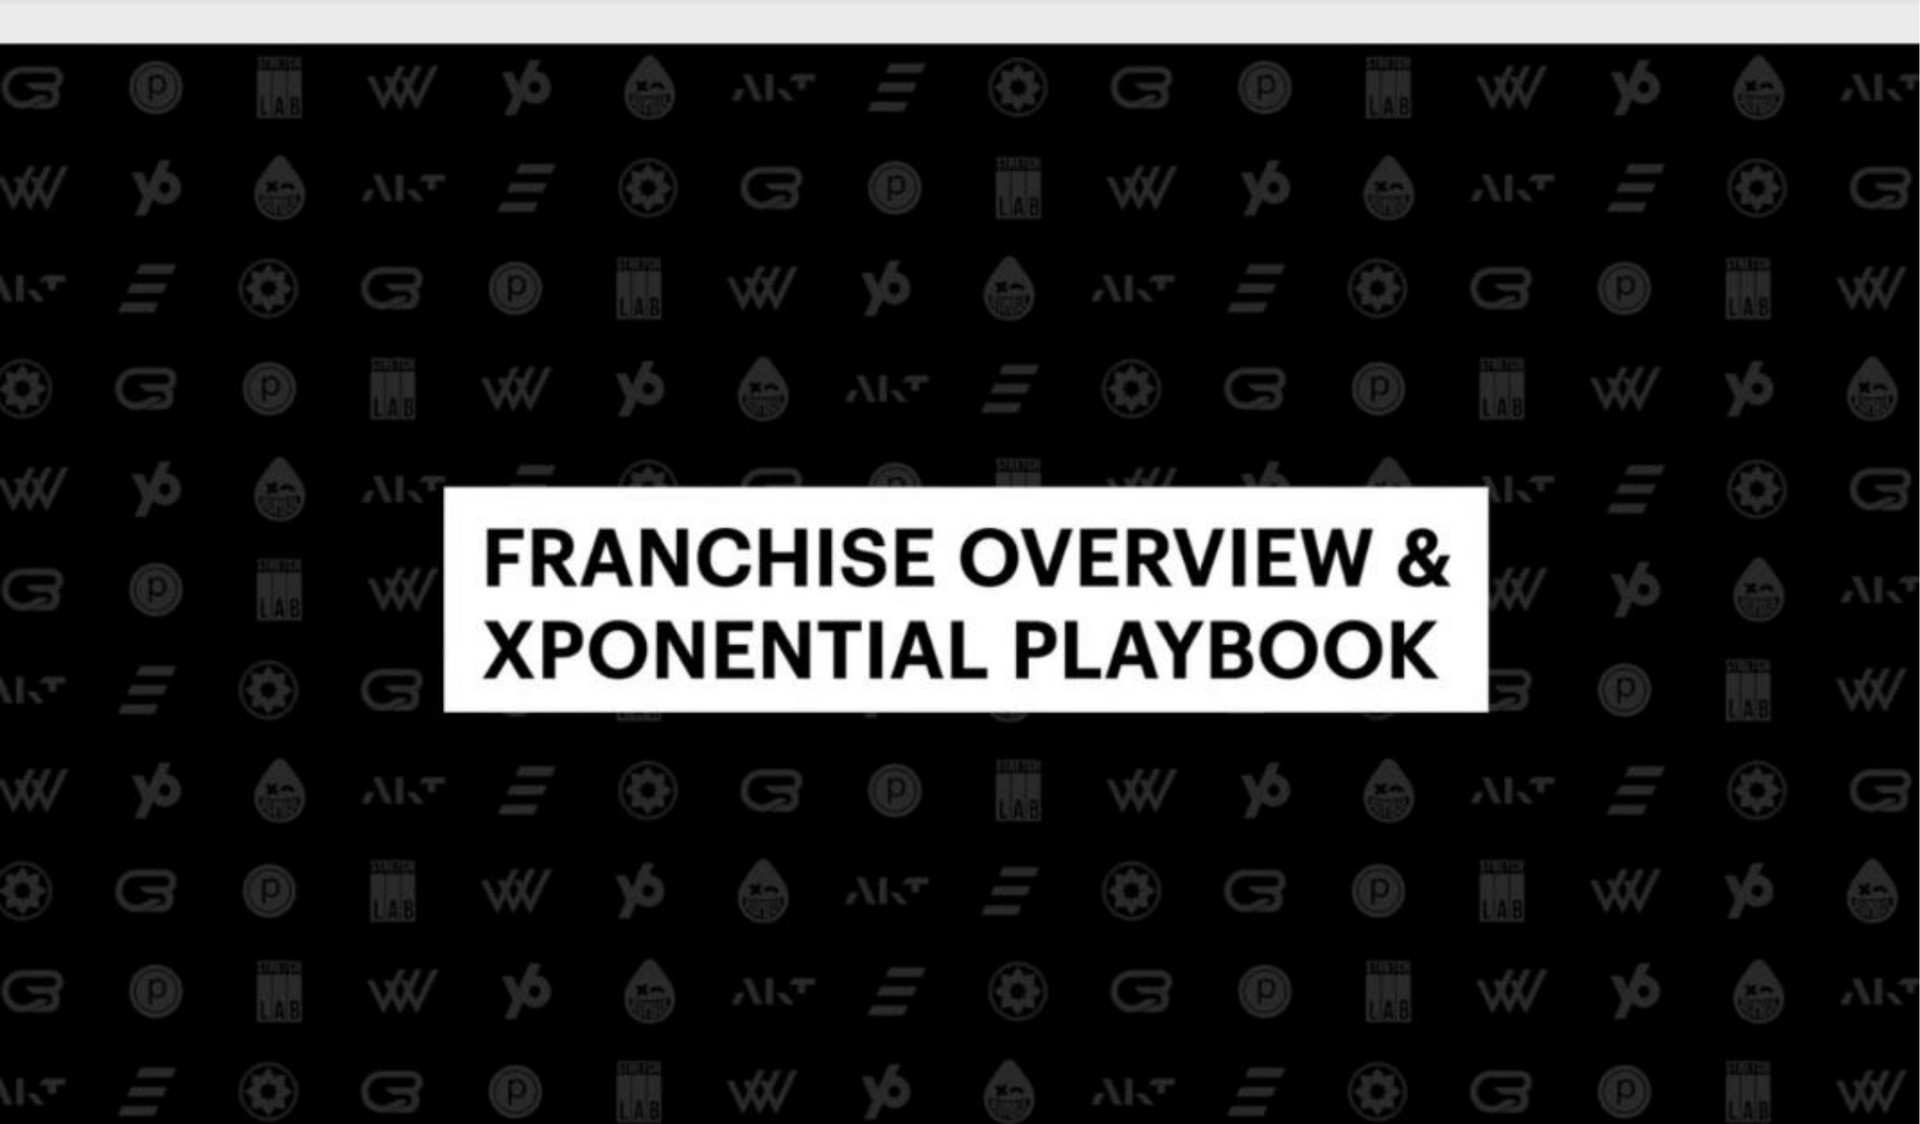 franchise overview playbook | Xponential